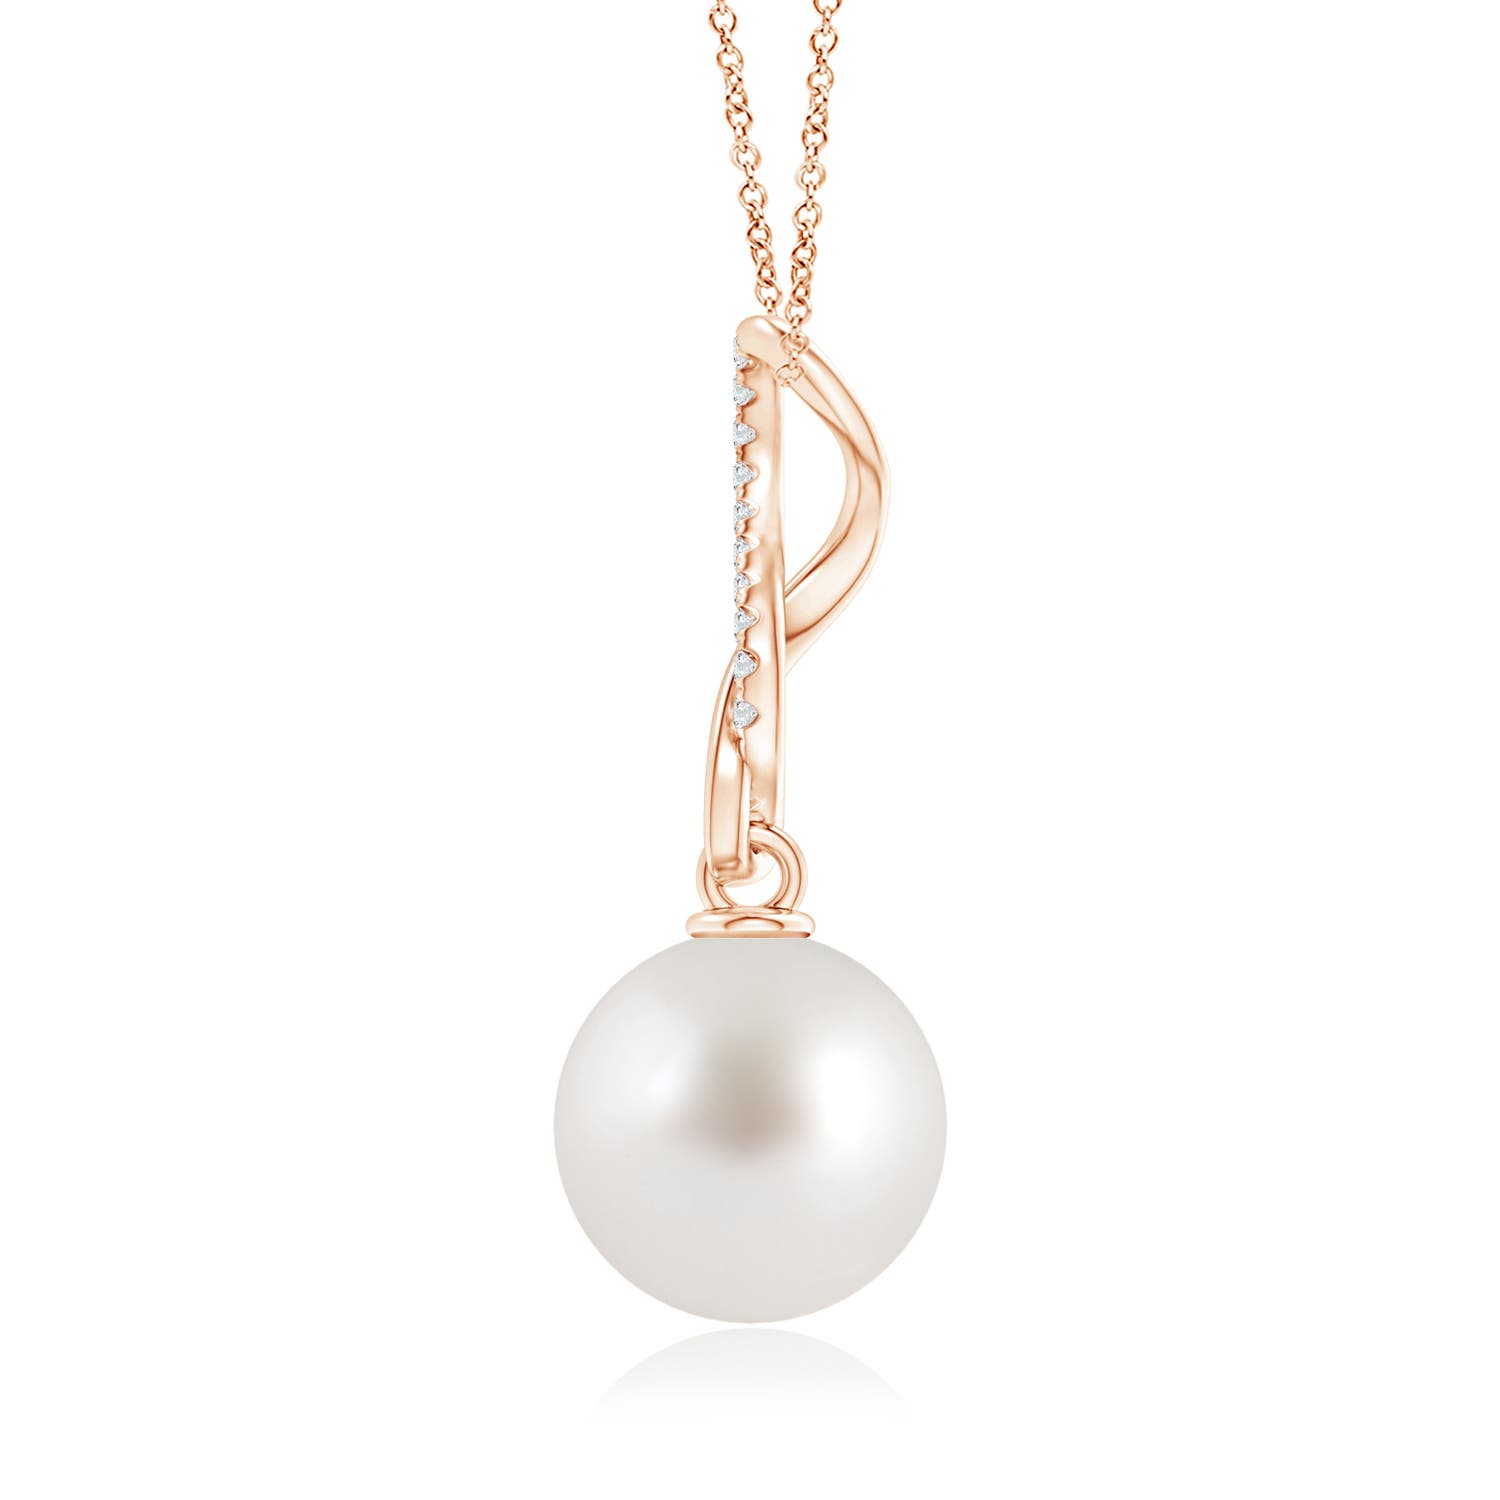 AAA - South Sea Cultured Pearl / 7.26 CT / 14 KT Rose Gold